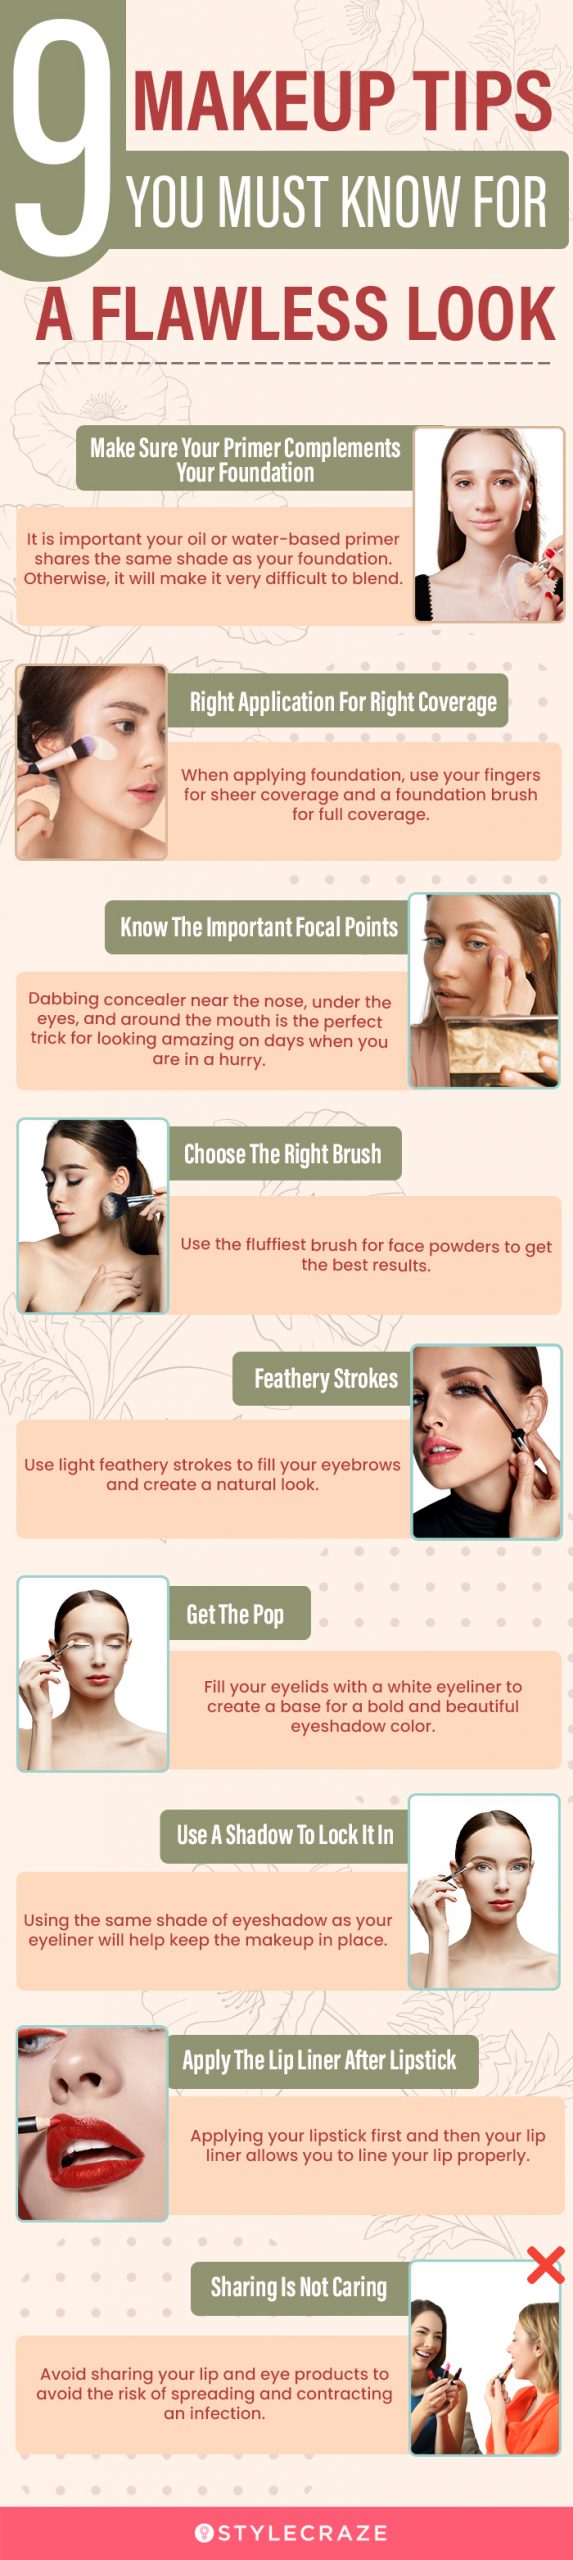 9 makeup tips you must know for a flawless look (infographic)